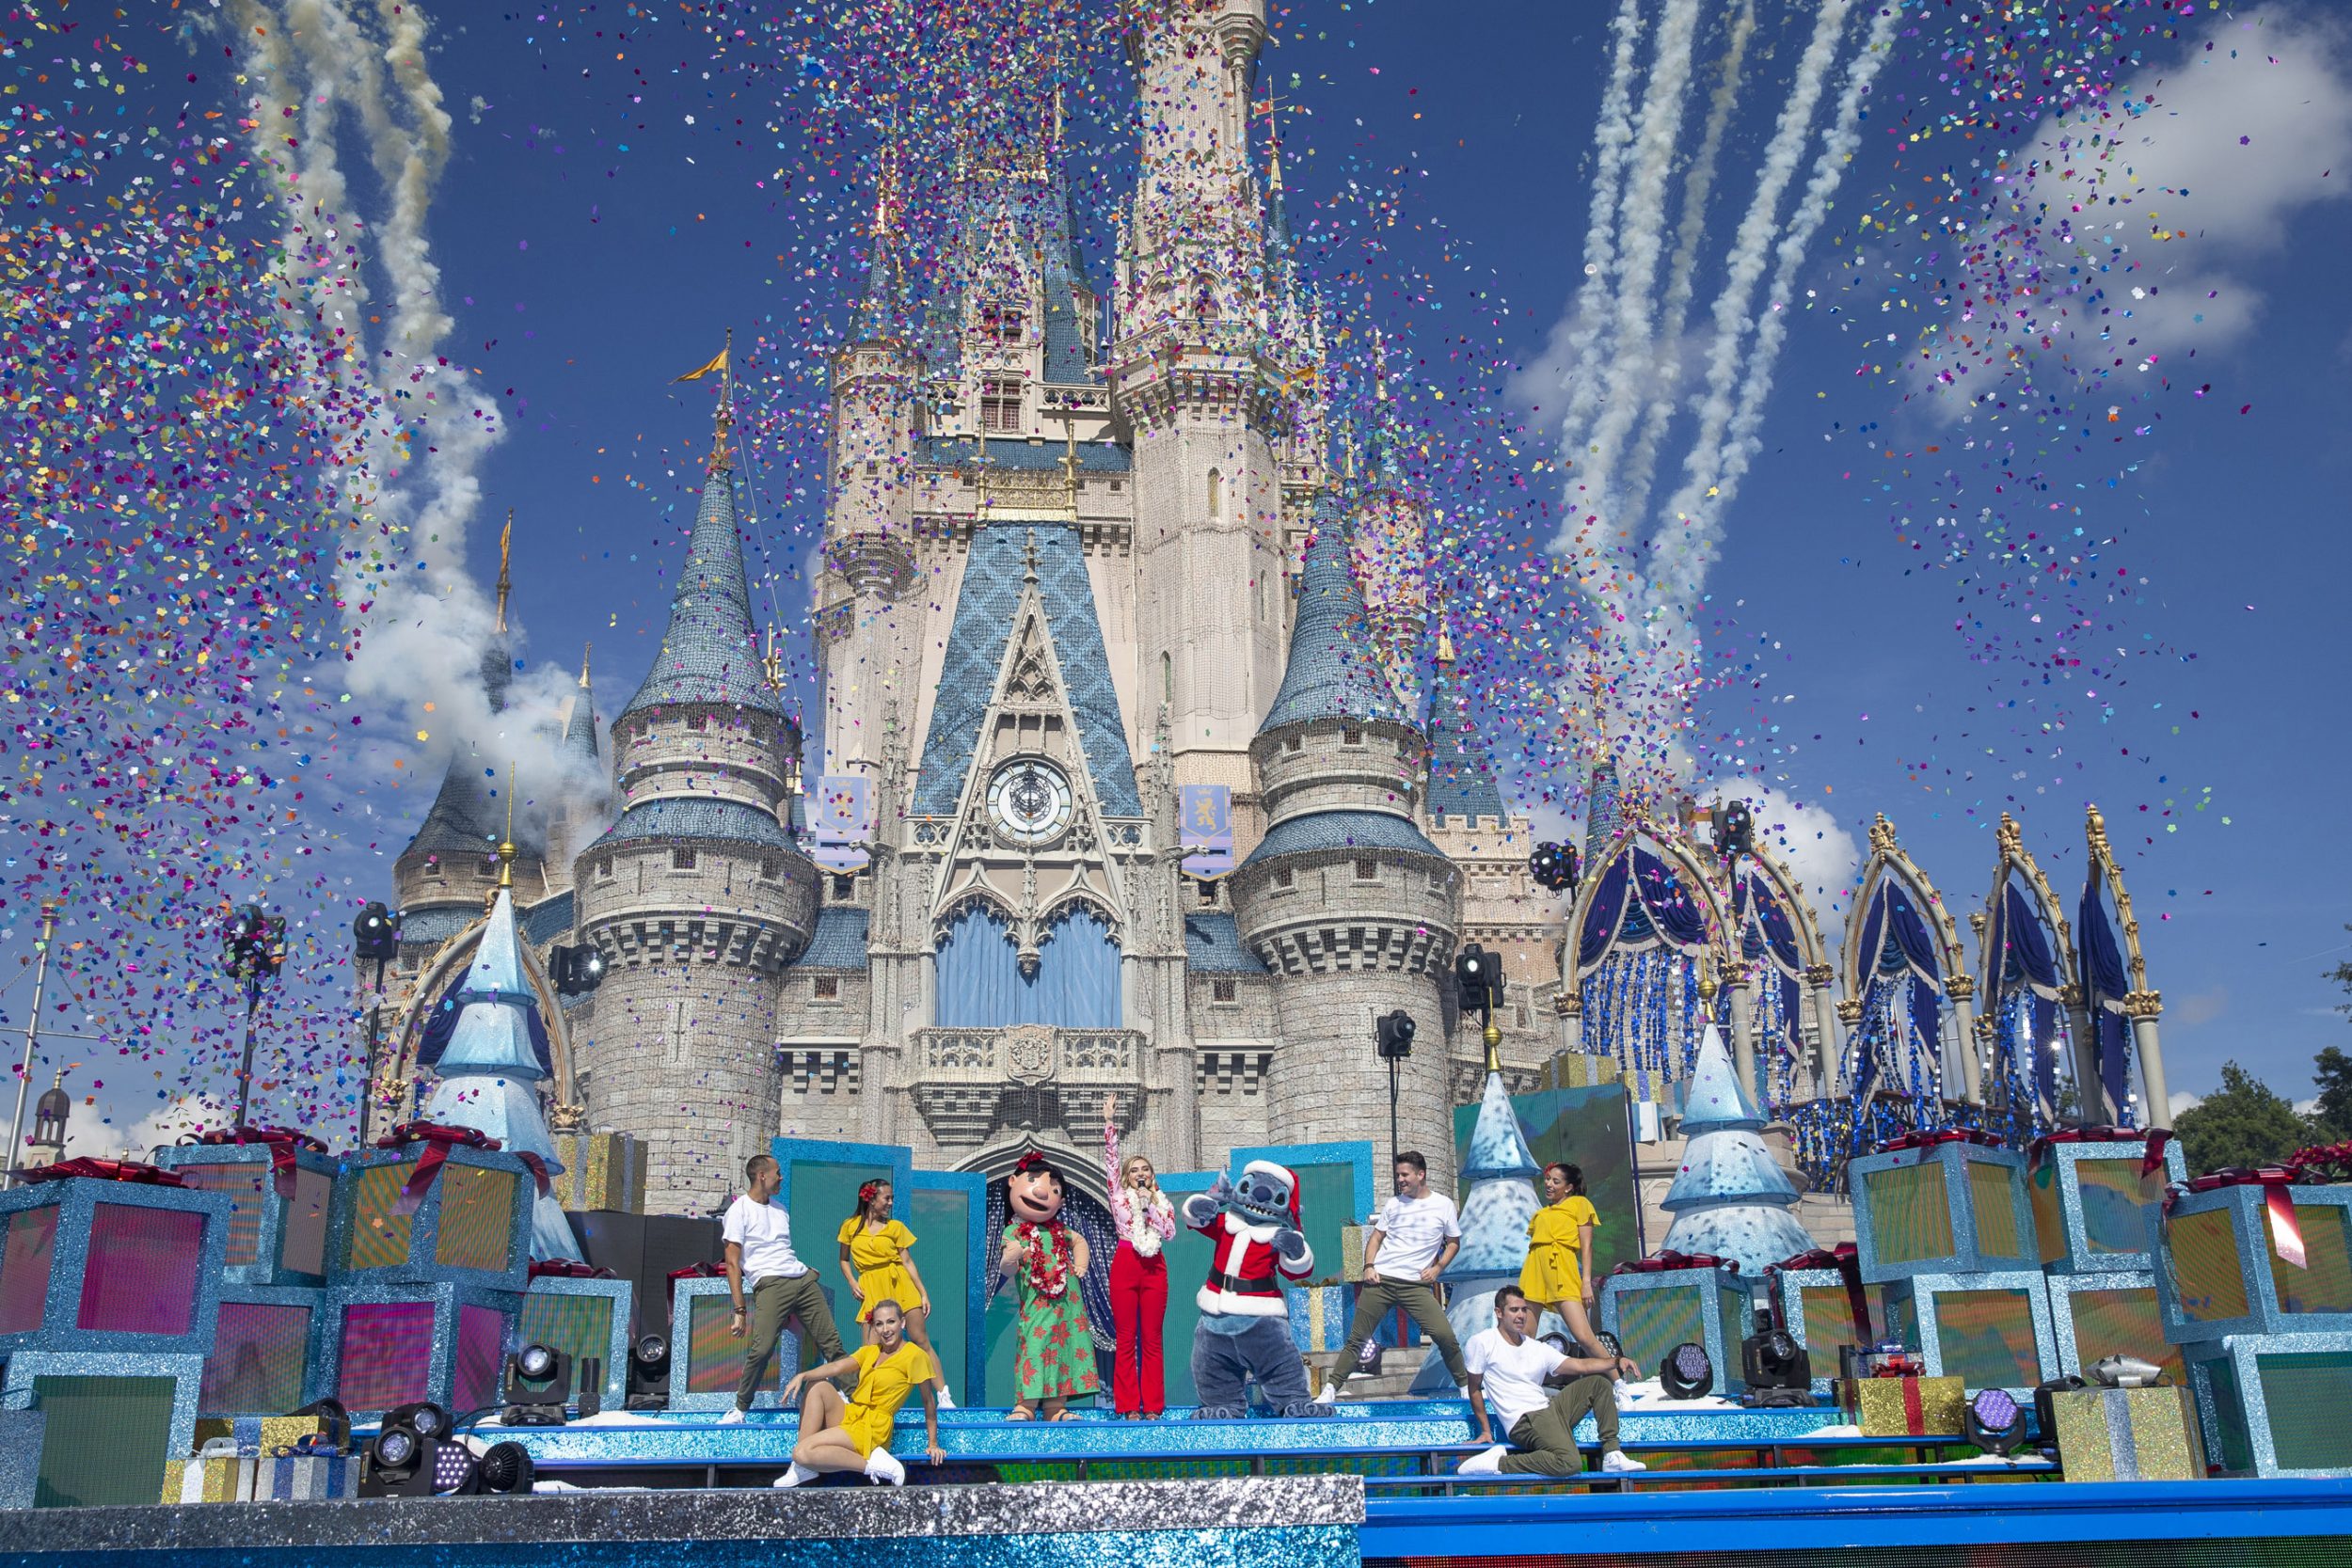 DISNEY PARKS PRESENTS A 25 DAYS OF CHRISTMAS HOLIDAY PARTY - "Disney P...